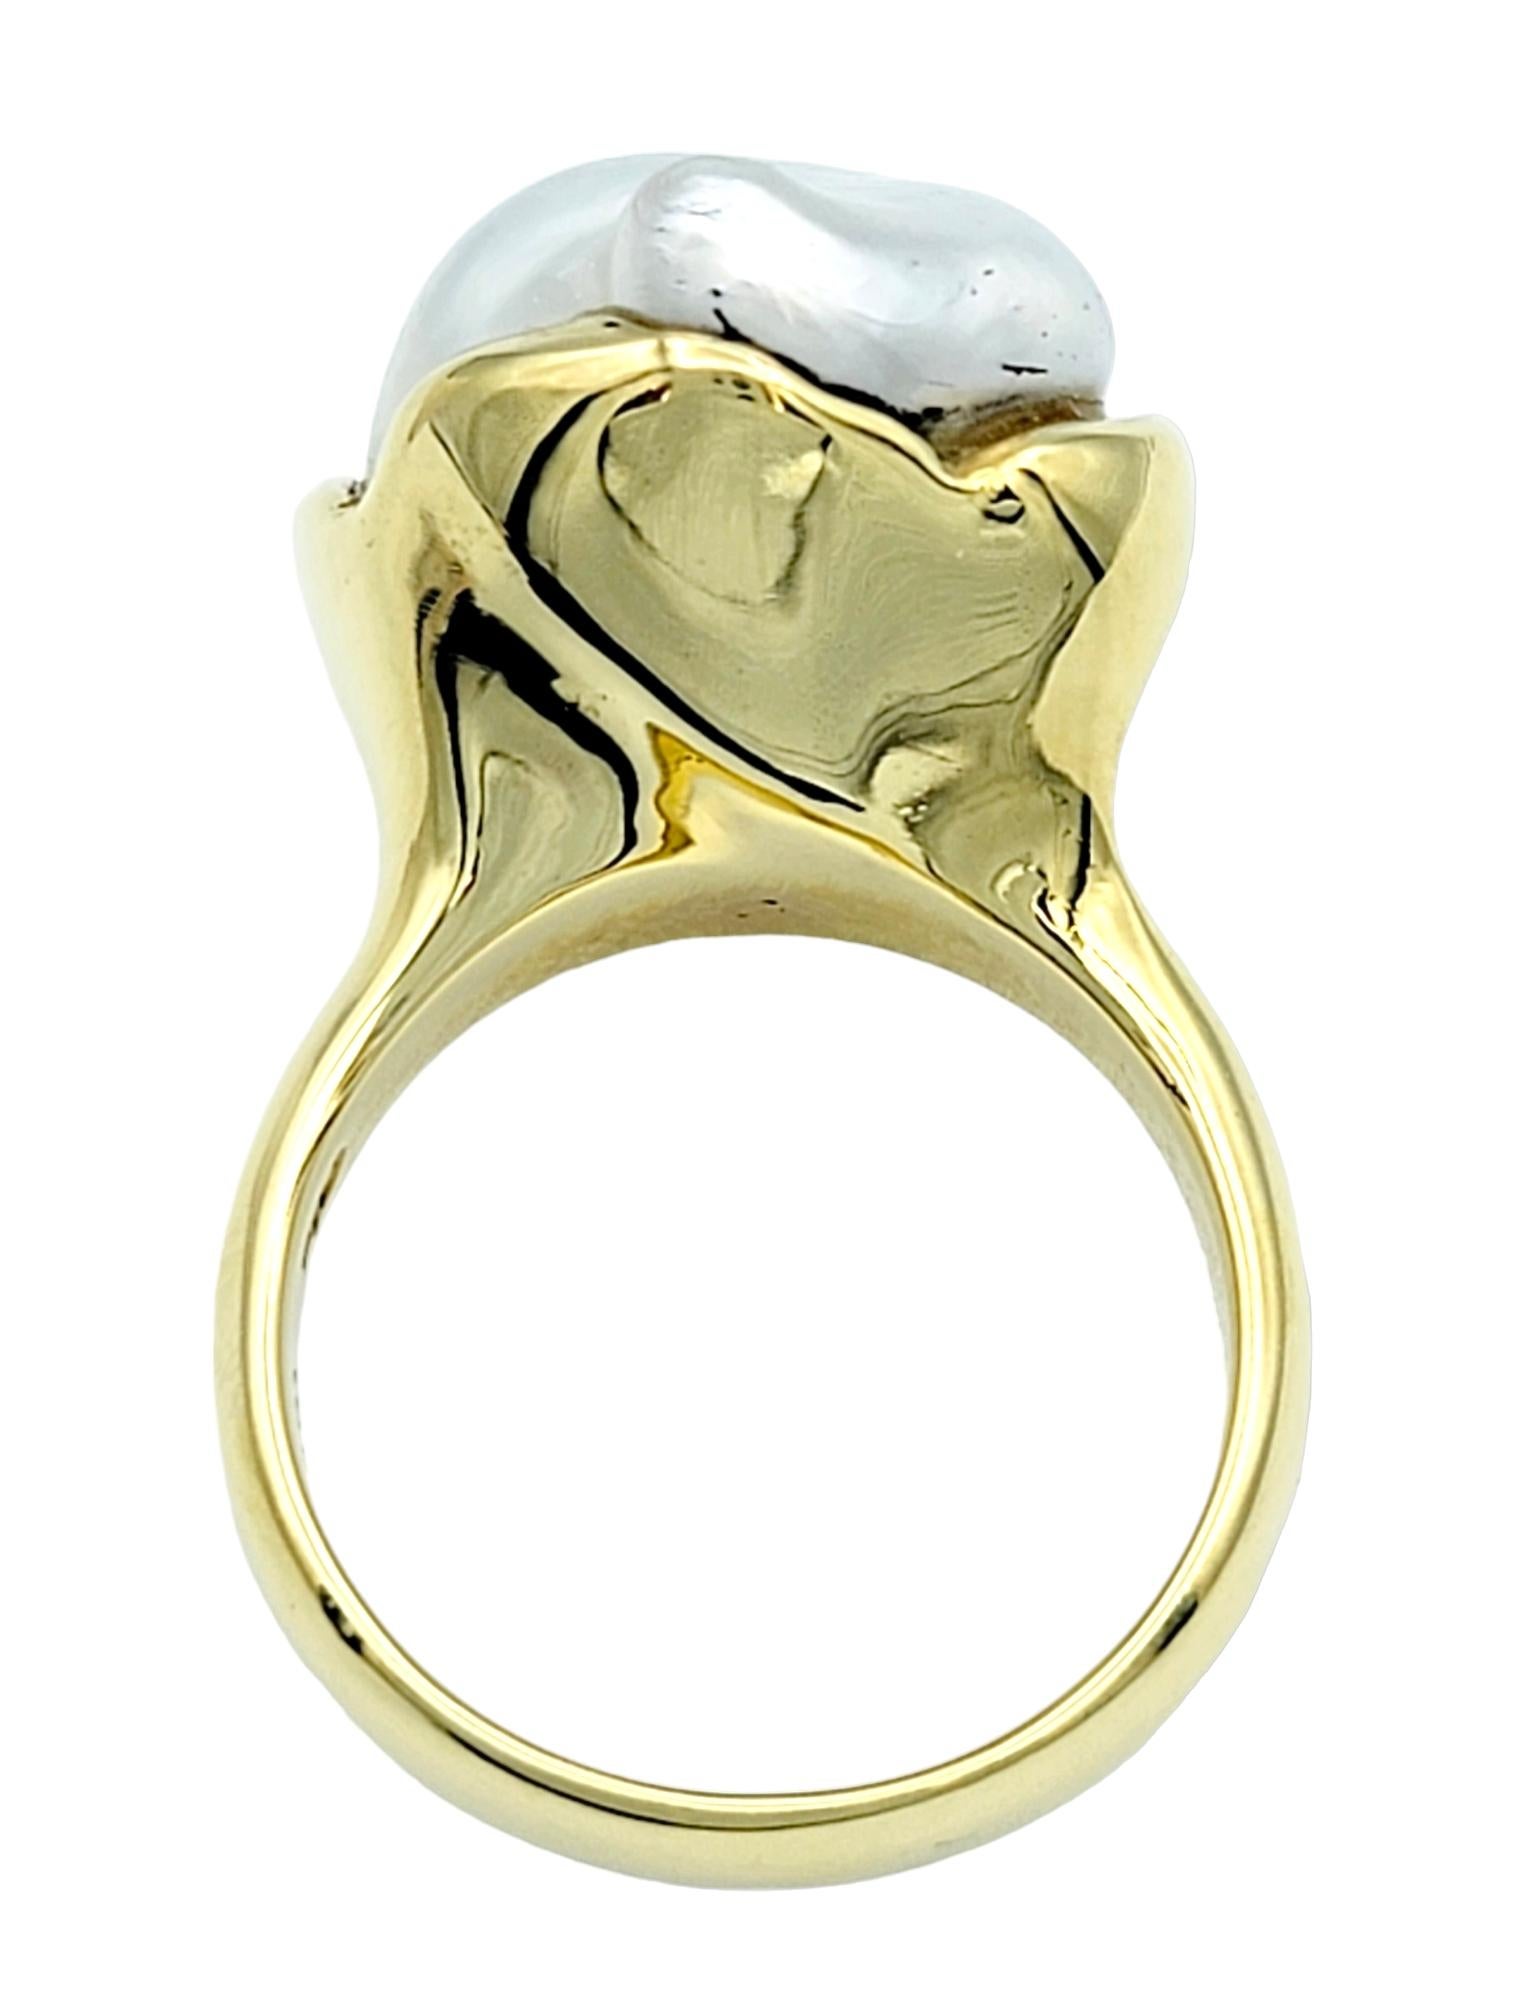 Cultured Baroque Fresh Water Pearl Freeform 18 Karat Yellow Gold Cocktail Ring  In Good Condition For Sale In Scottsdale, AZ